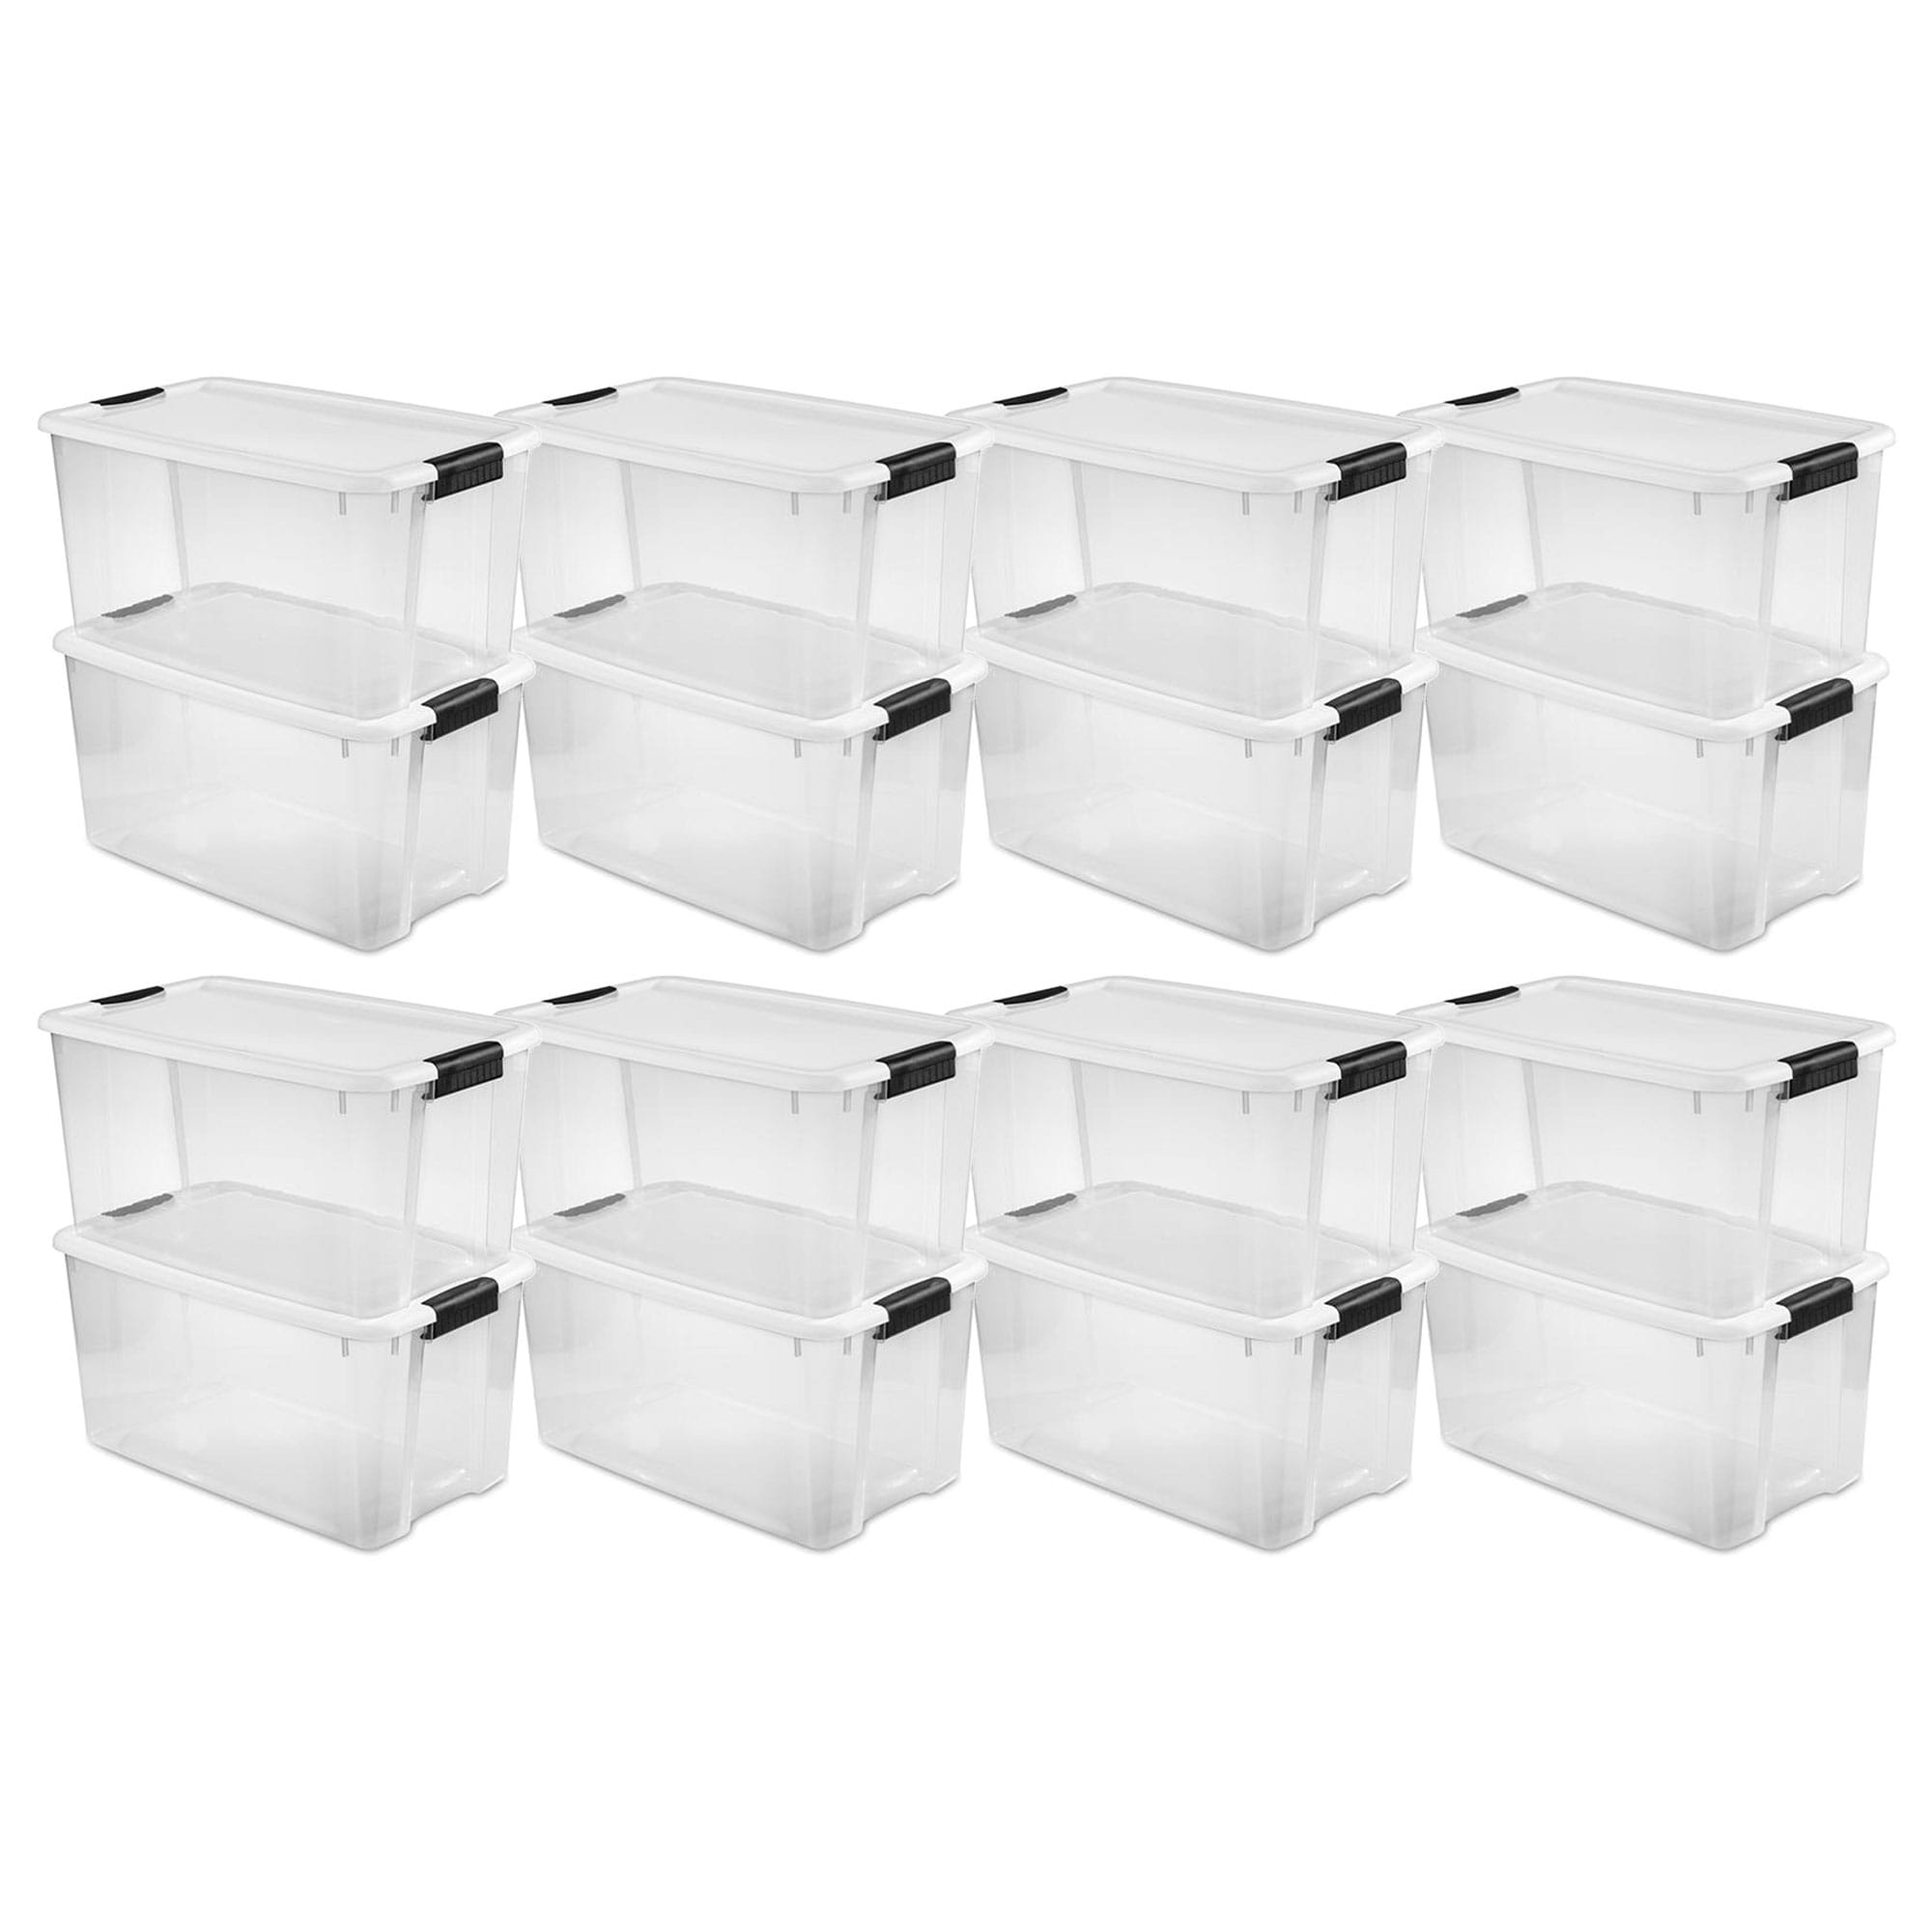 https://ak1.ostkcdn.com/images/products/is/images/direct/080af6dfe69bb933c236b9f59f794cb5b42c4f83/Sterilite-70-Qt-Clear-Plastic-Stackable-Storage-Bin-with-Latching-Lid%2C-%284-Pack%29.jpg